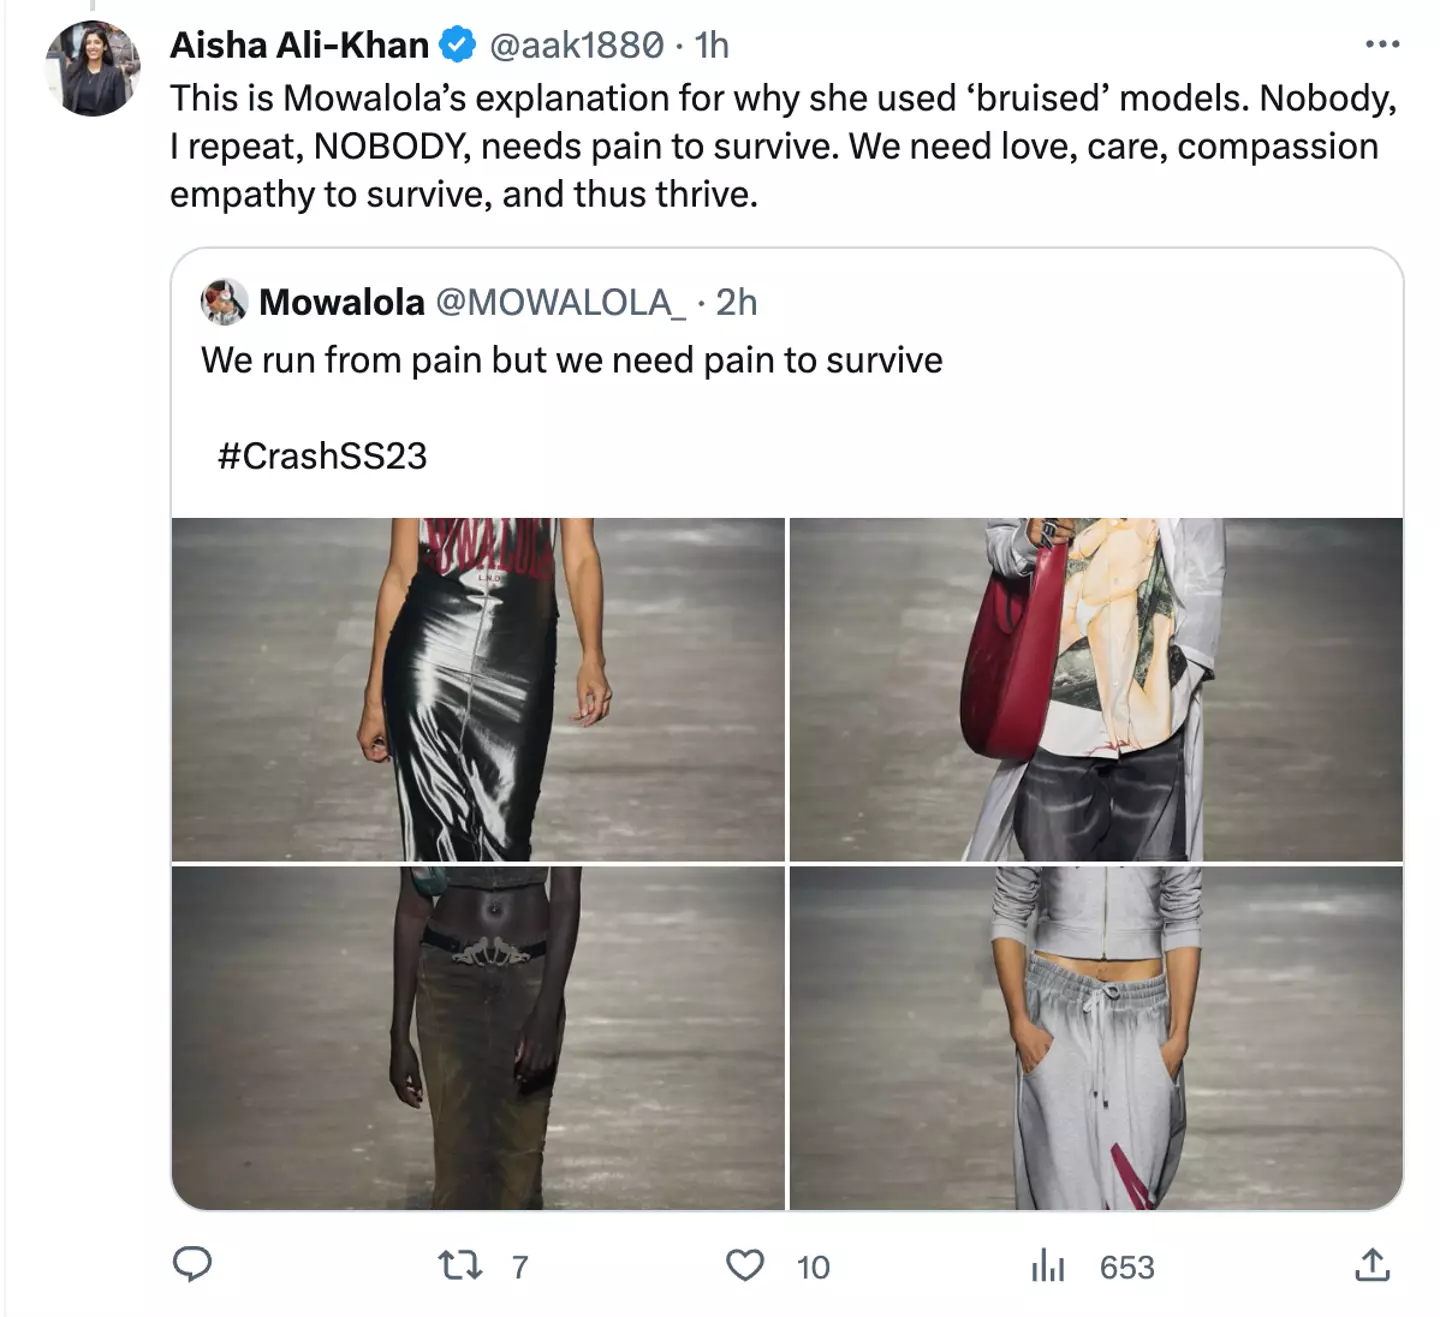 Aisha Ali-Khan called out the brand for its 'explanation' for why they used ‘bruised’ models.